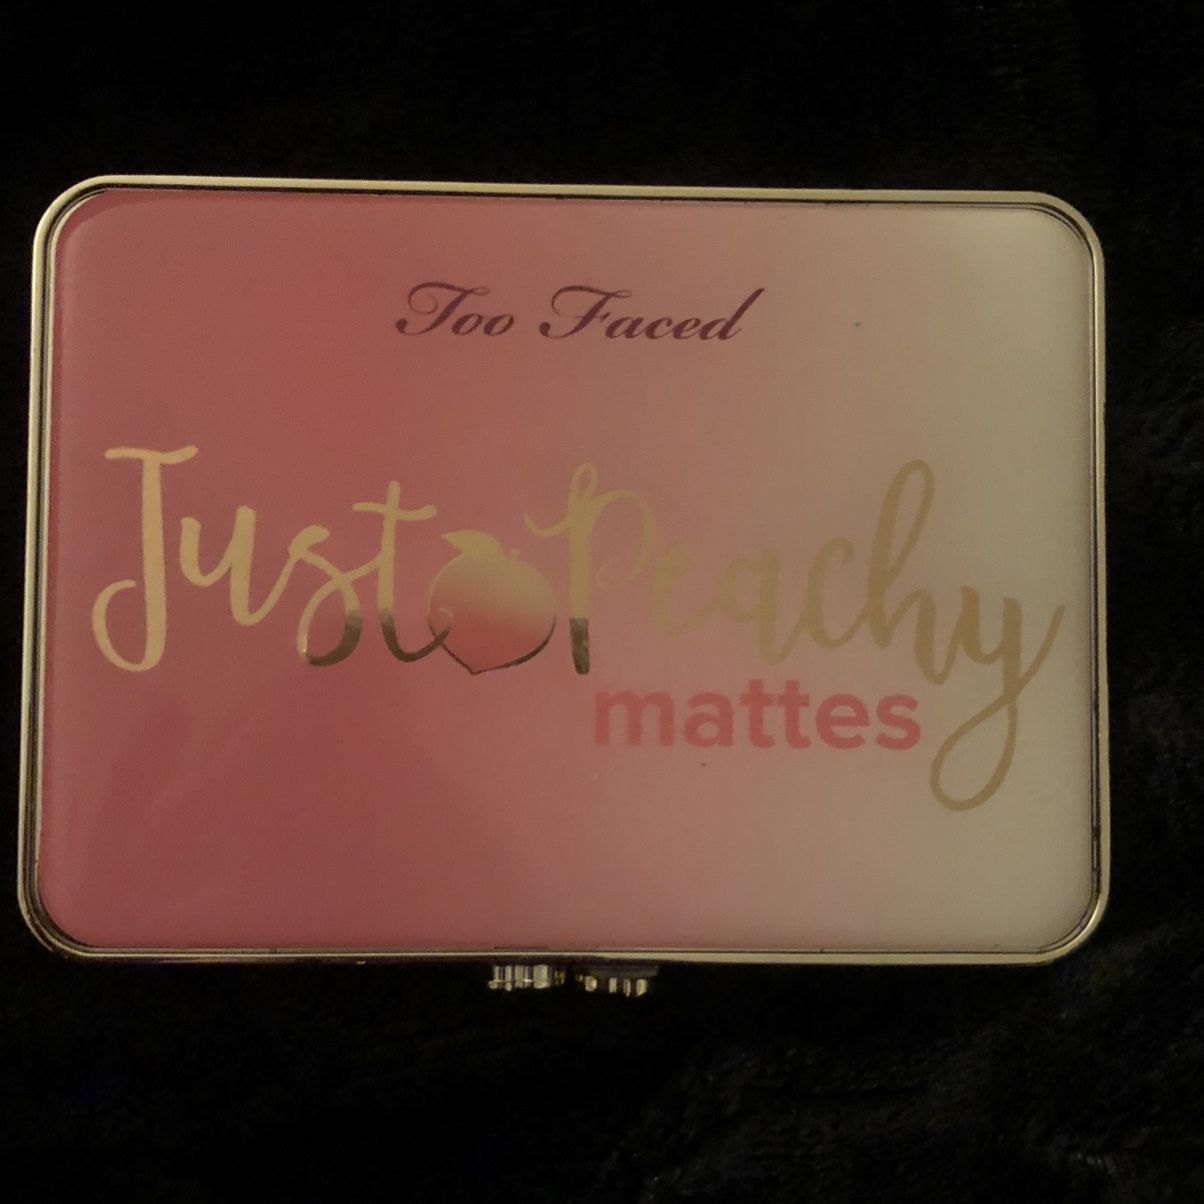 Too Faced Just Peachy Mattes Pallete